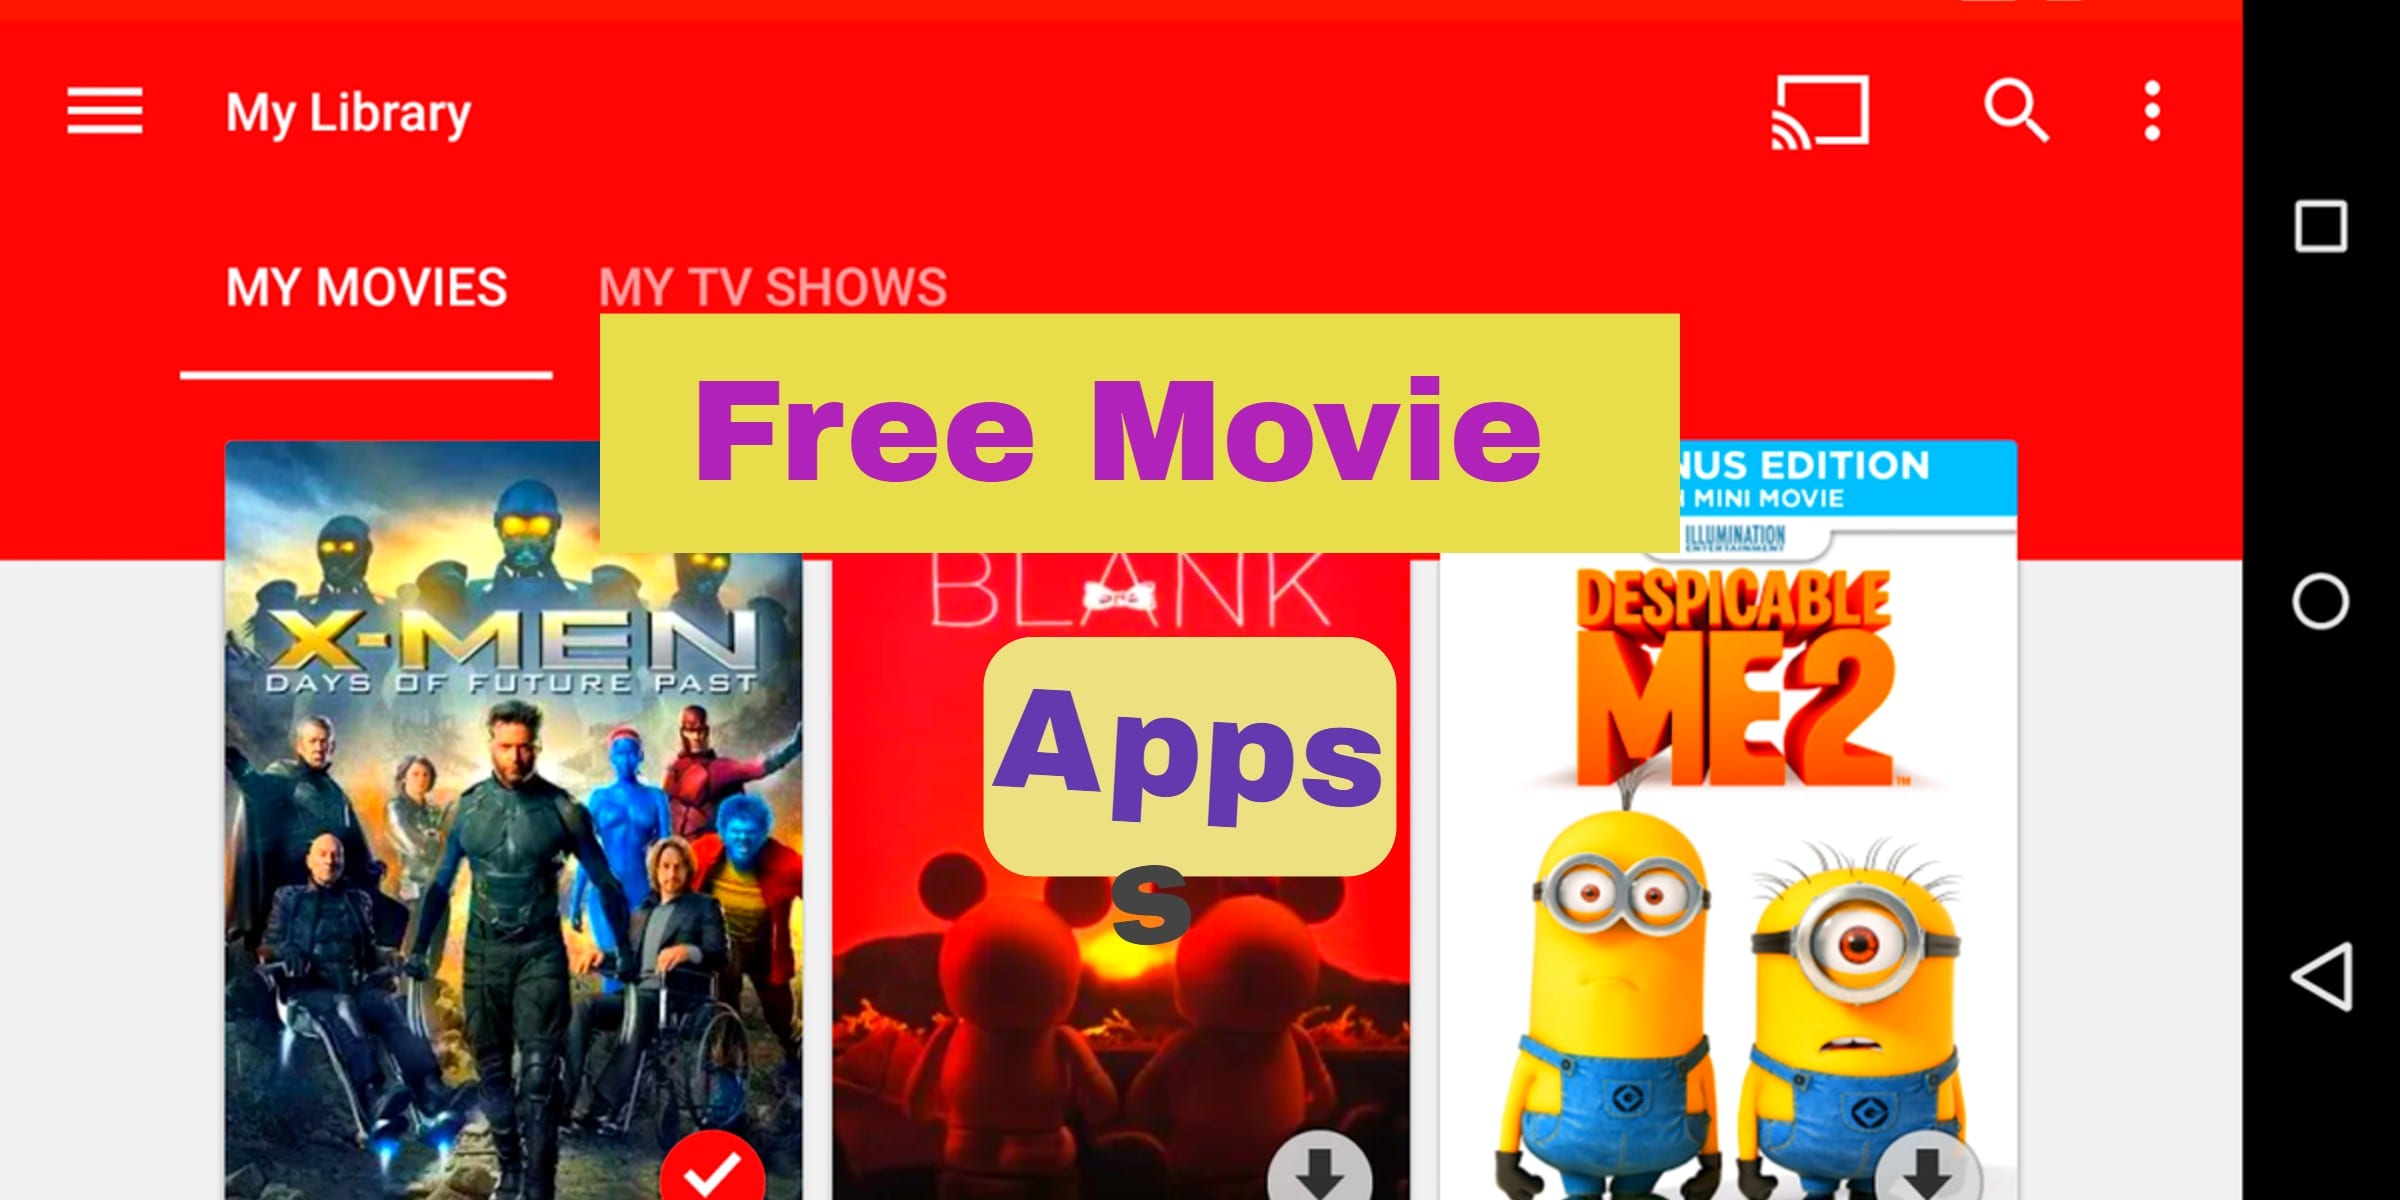 13 best free movie apps for Android & IOS in 2016 Free